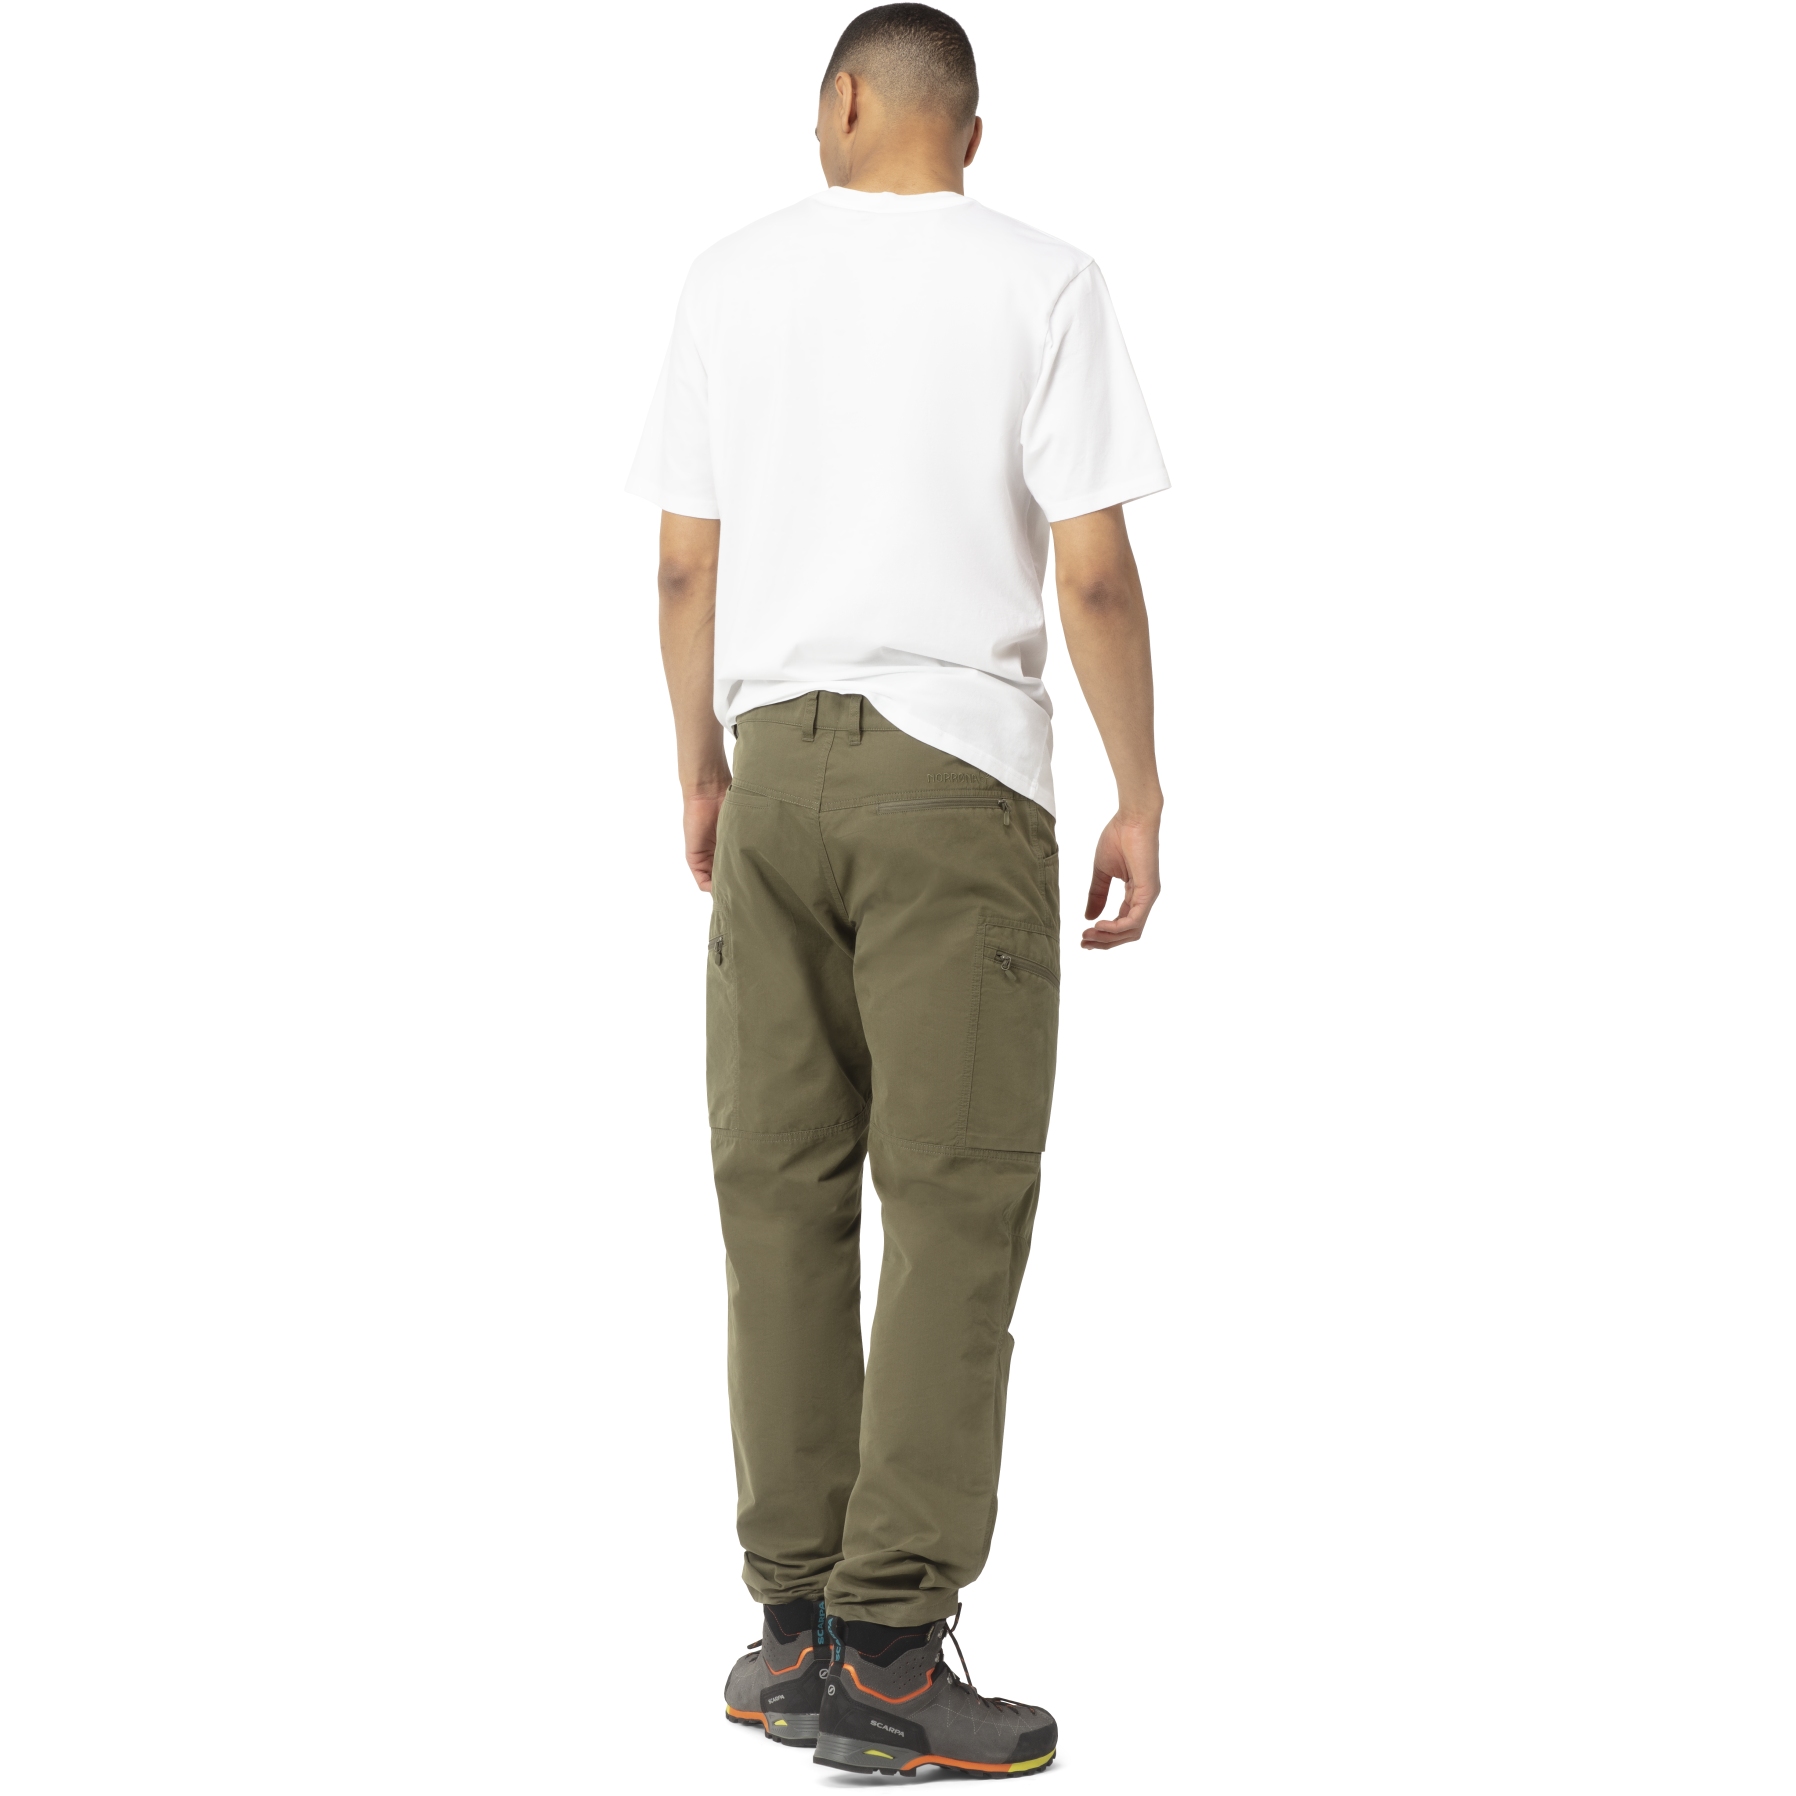 The Best Hiking Trousers for Men by Nike. Nike HR